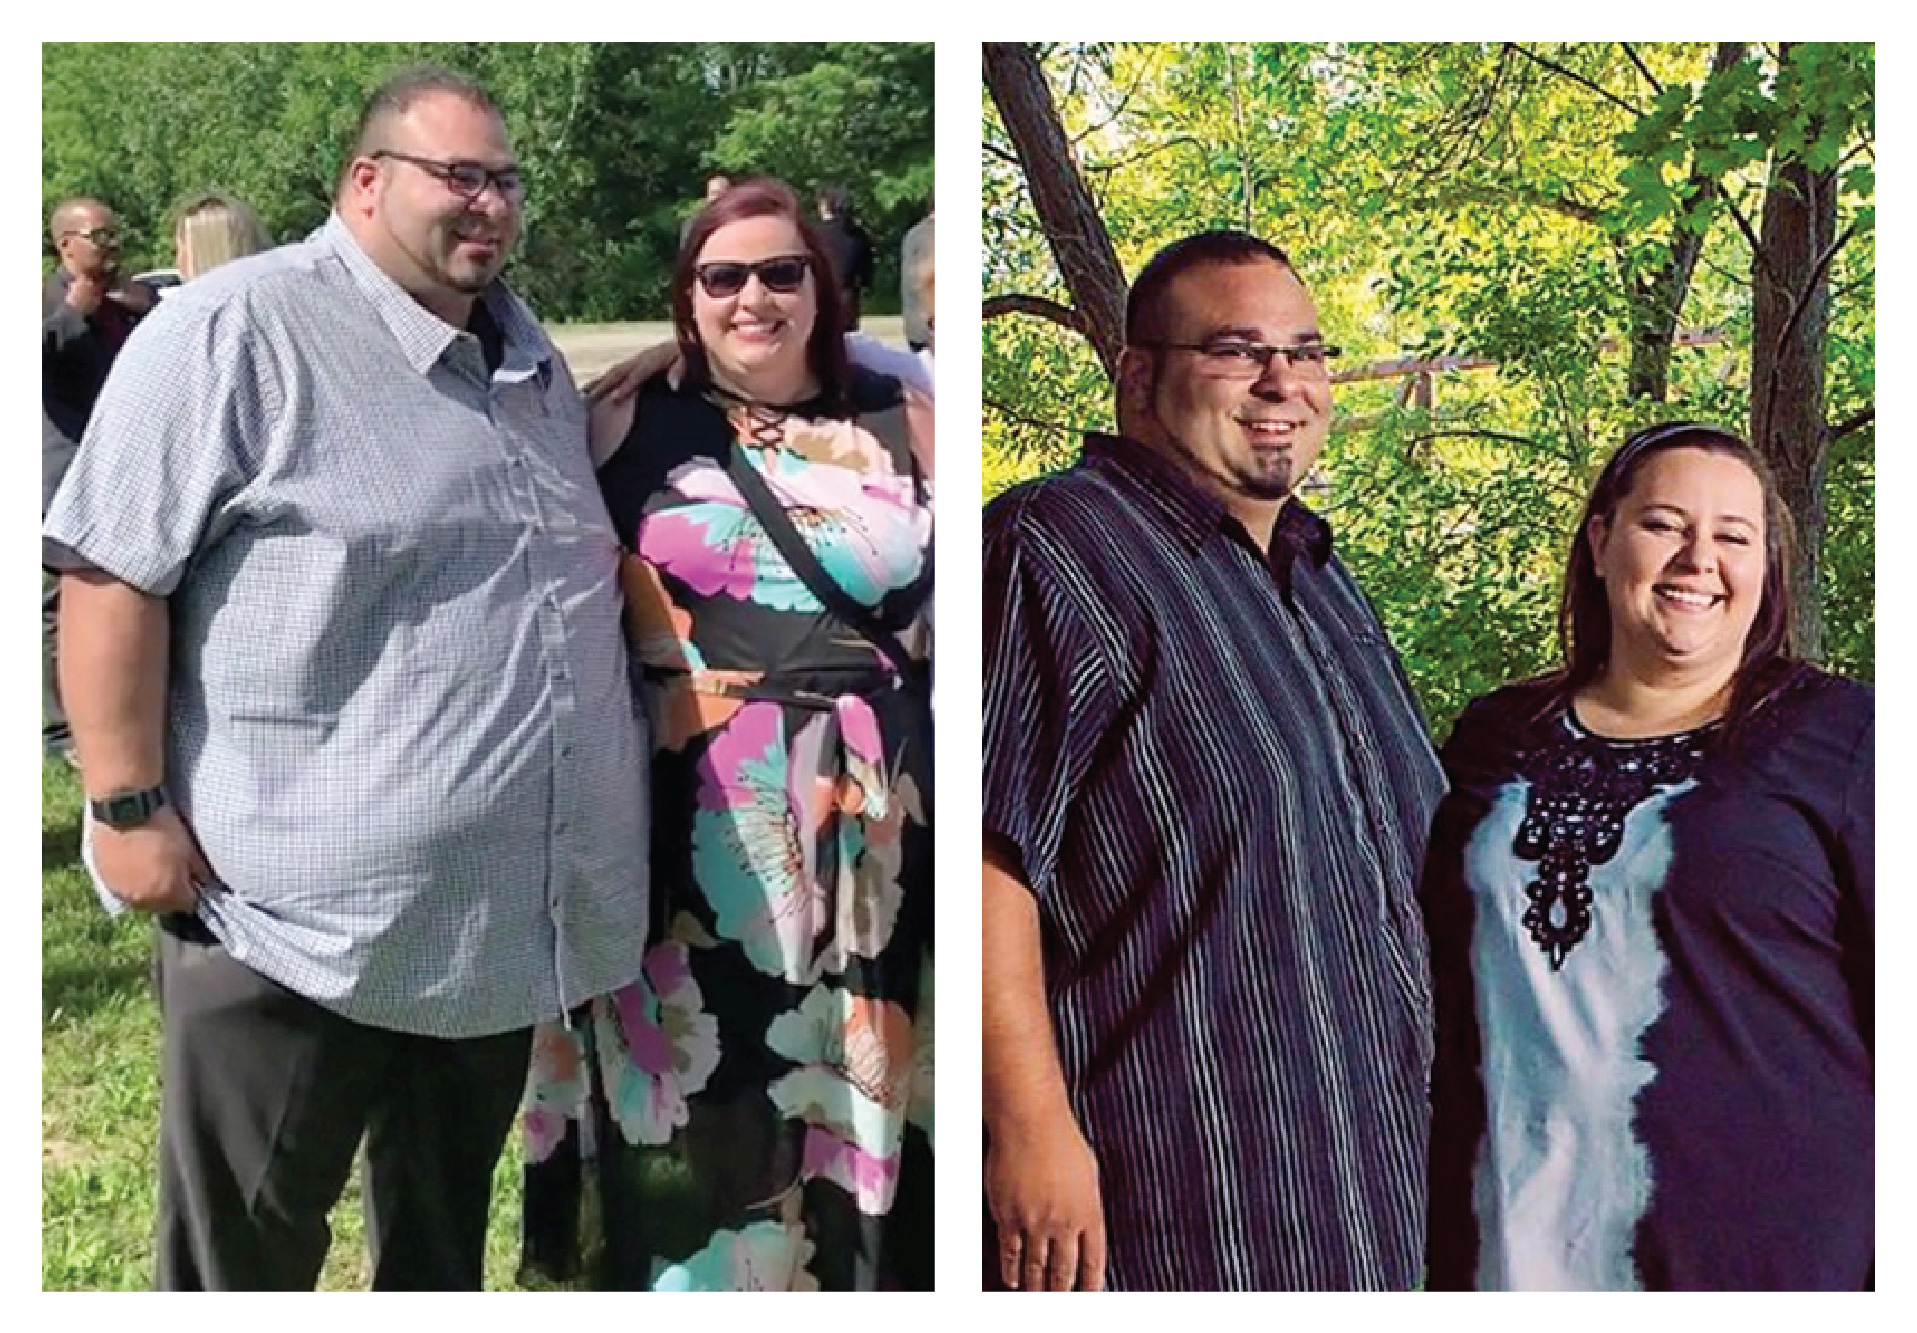 Keith and Sara Johnson before their gastric bypass surgeries.